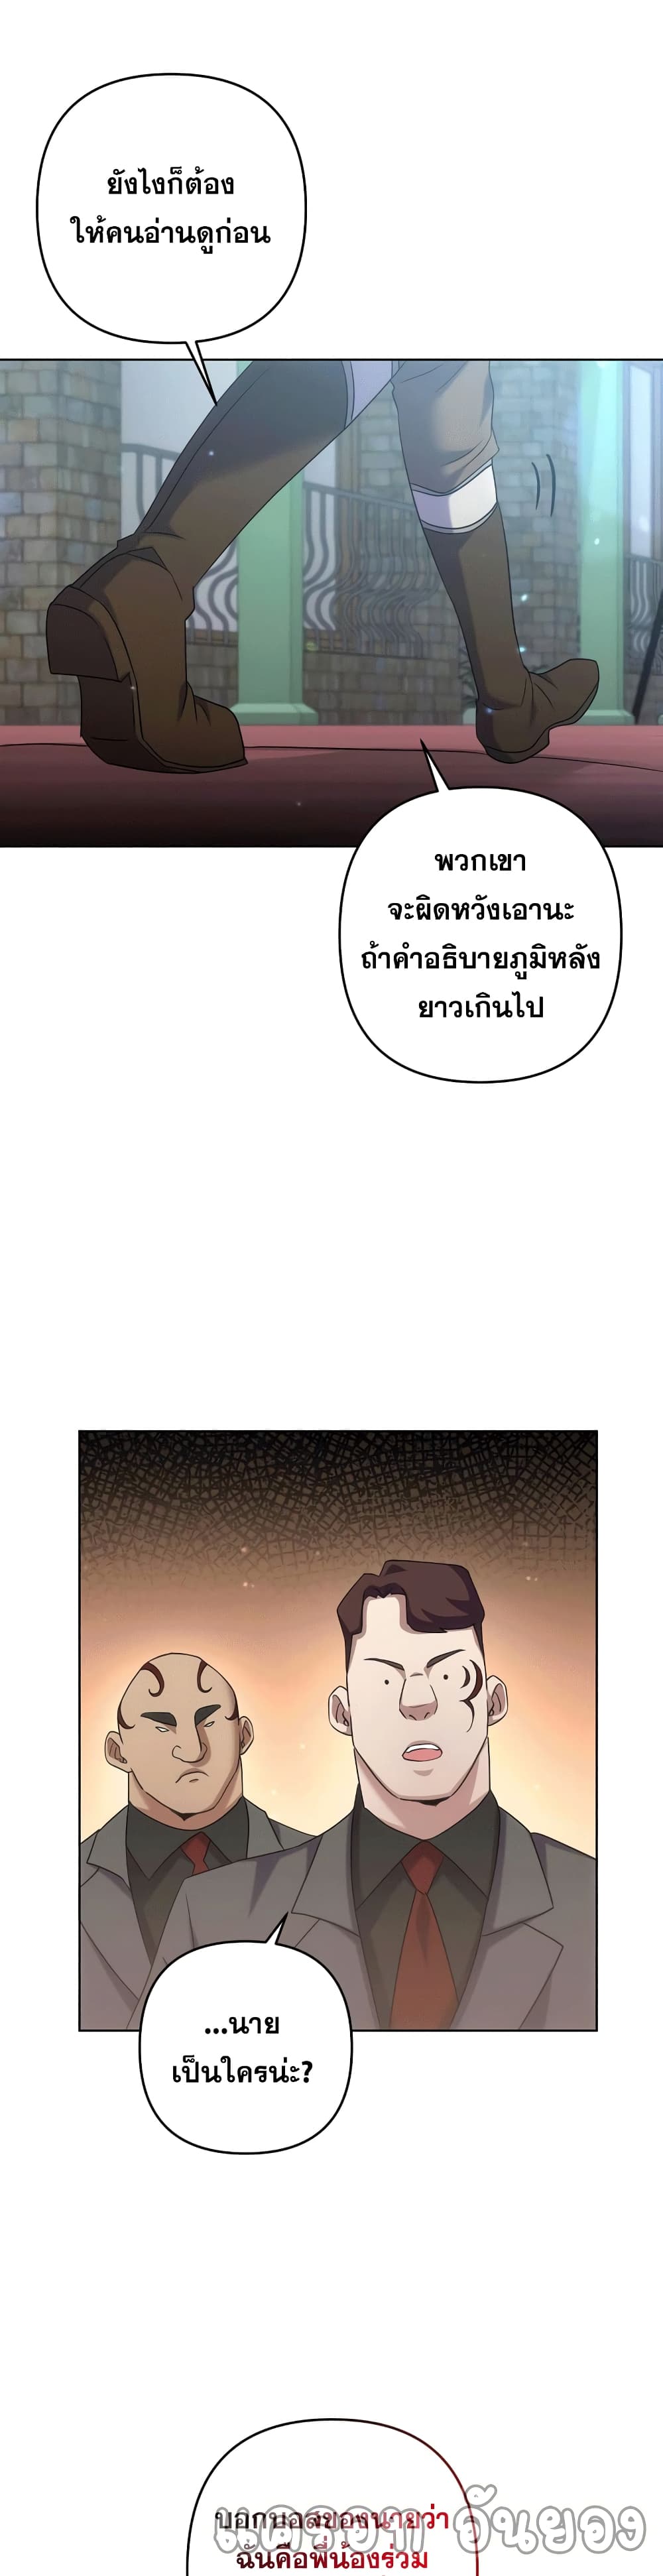 Surviving in an Action Manhwa 19 29